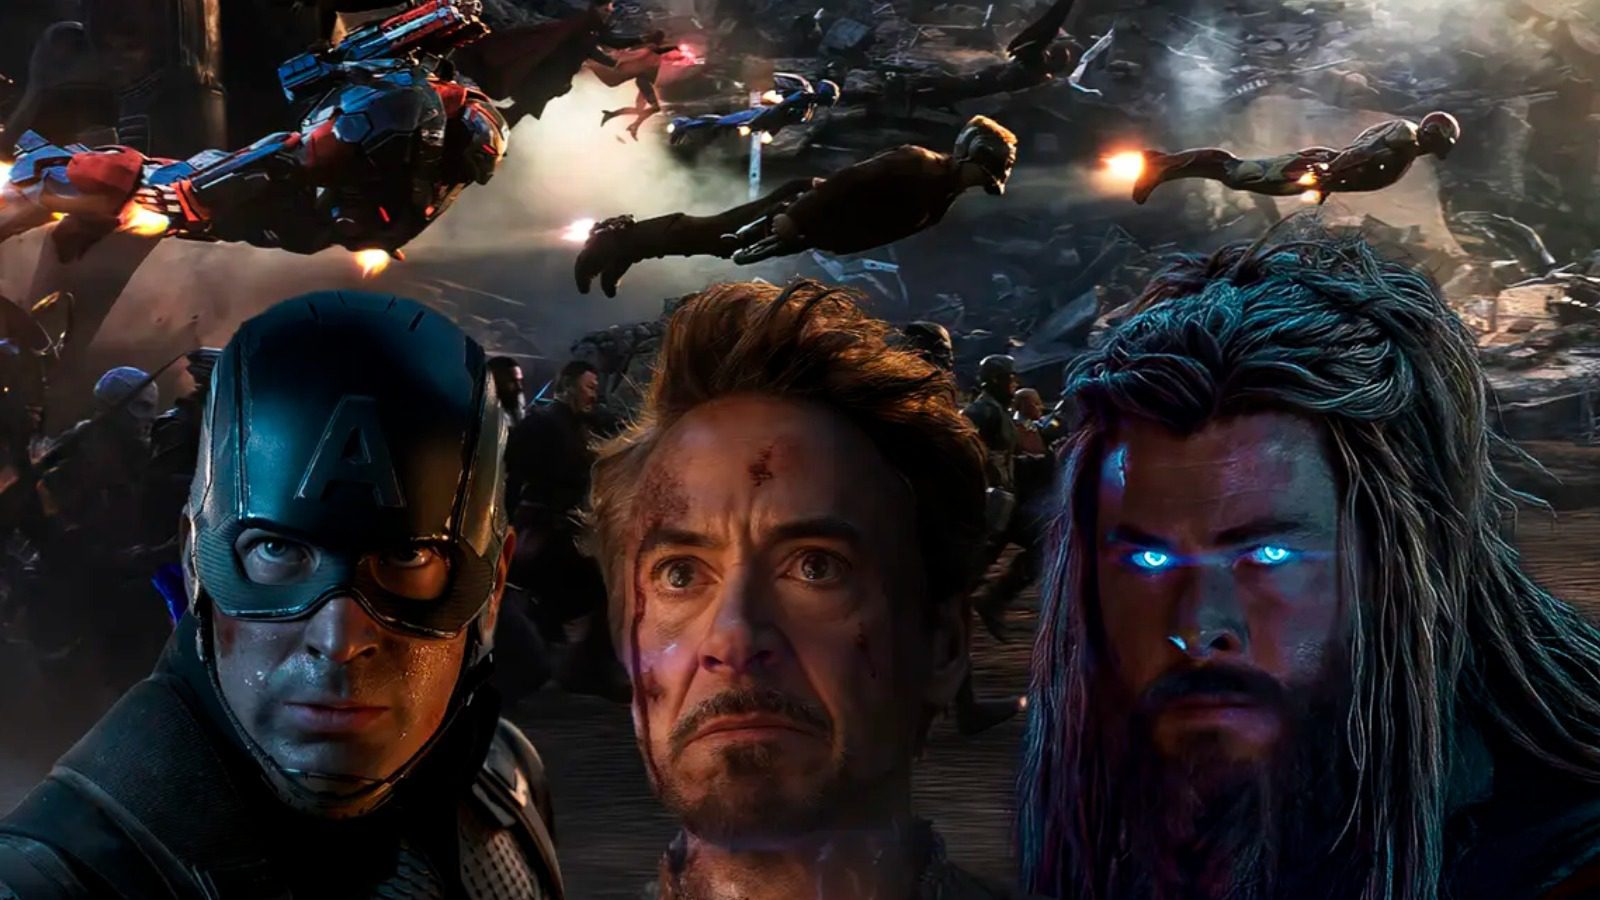 13 Things You Never Noticed About The Avengers: Endgame Final Battle